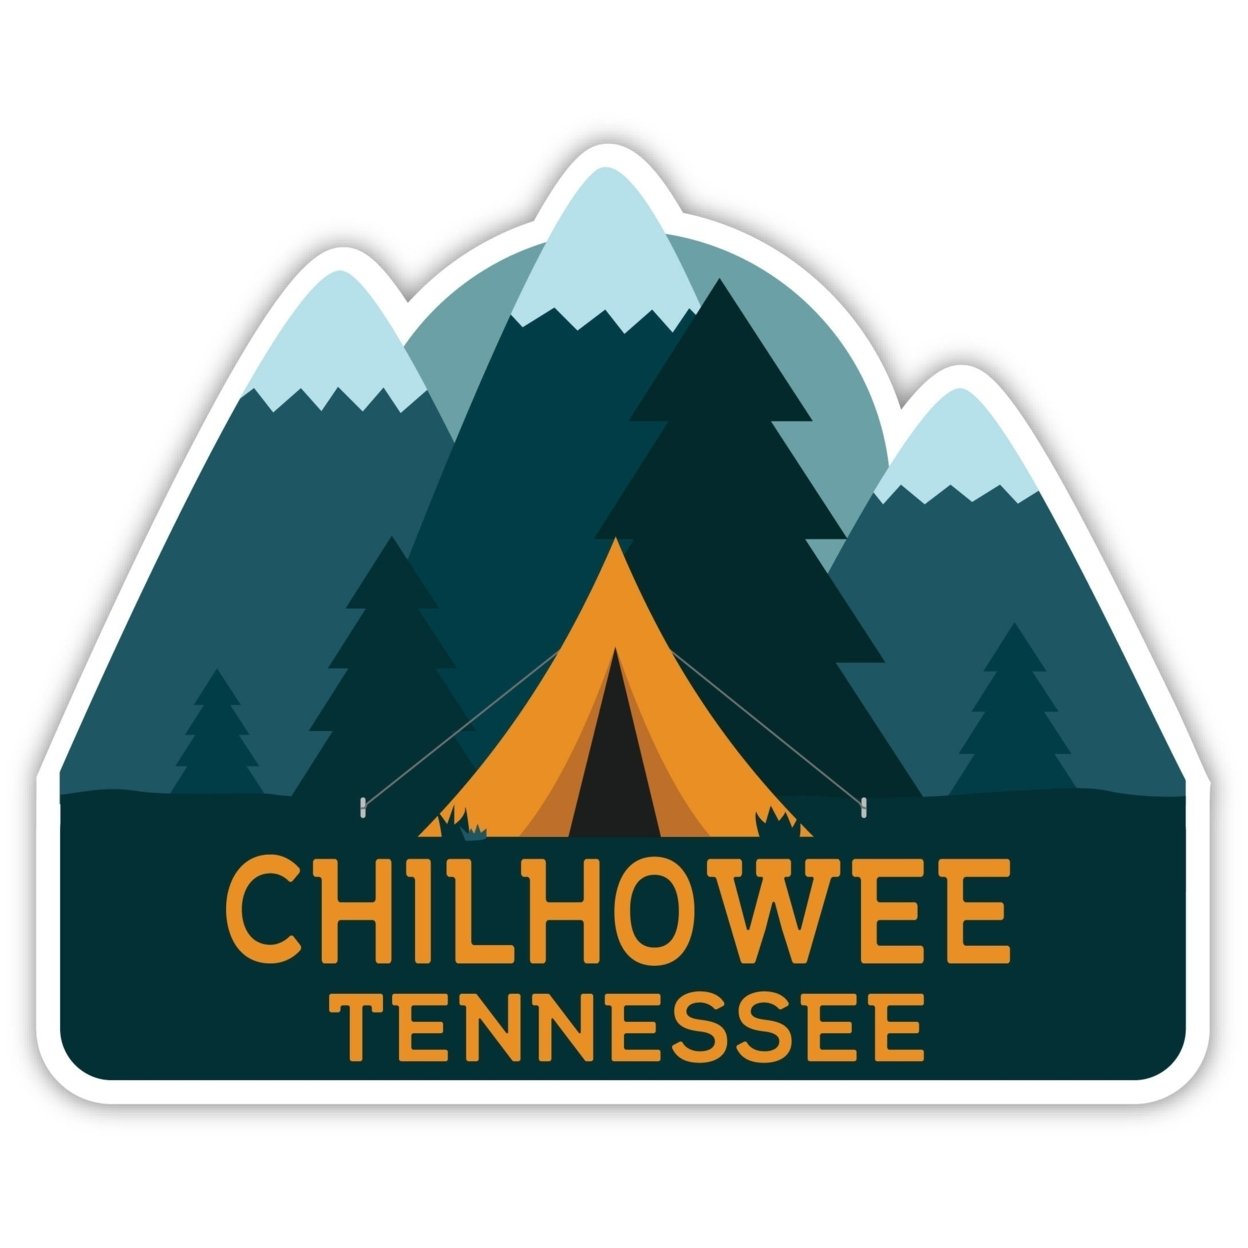 Chilhowee Tennessee Souvenir Decorative Stickers (Choose Theme And Size) - 4-Pack, 6-Inch, Tent